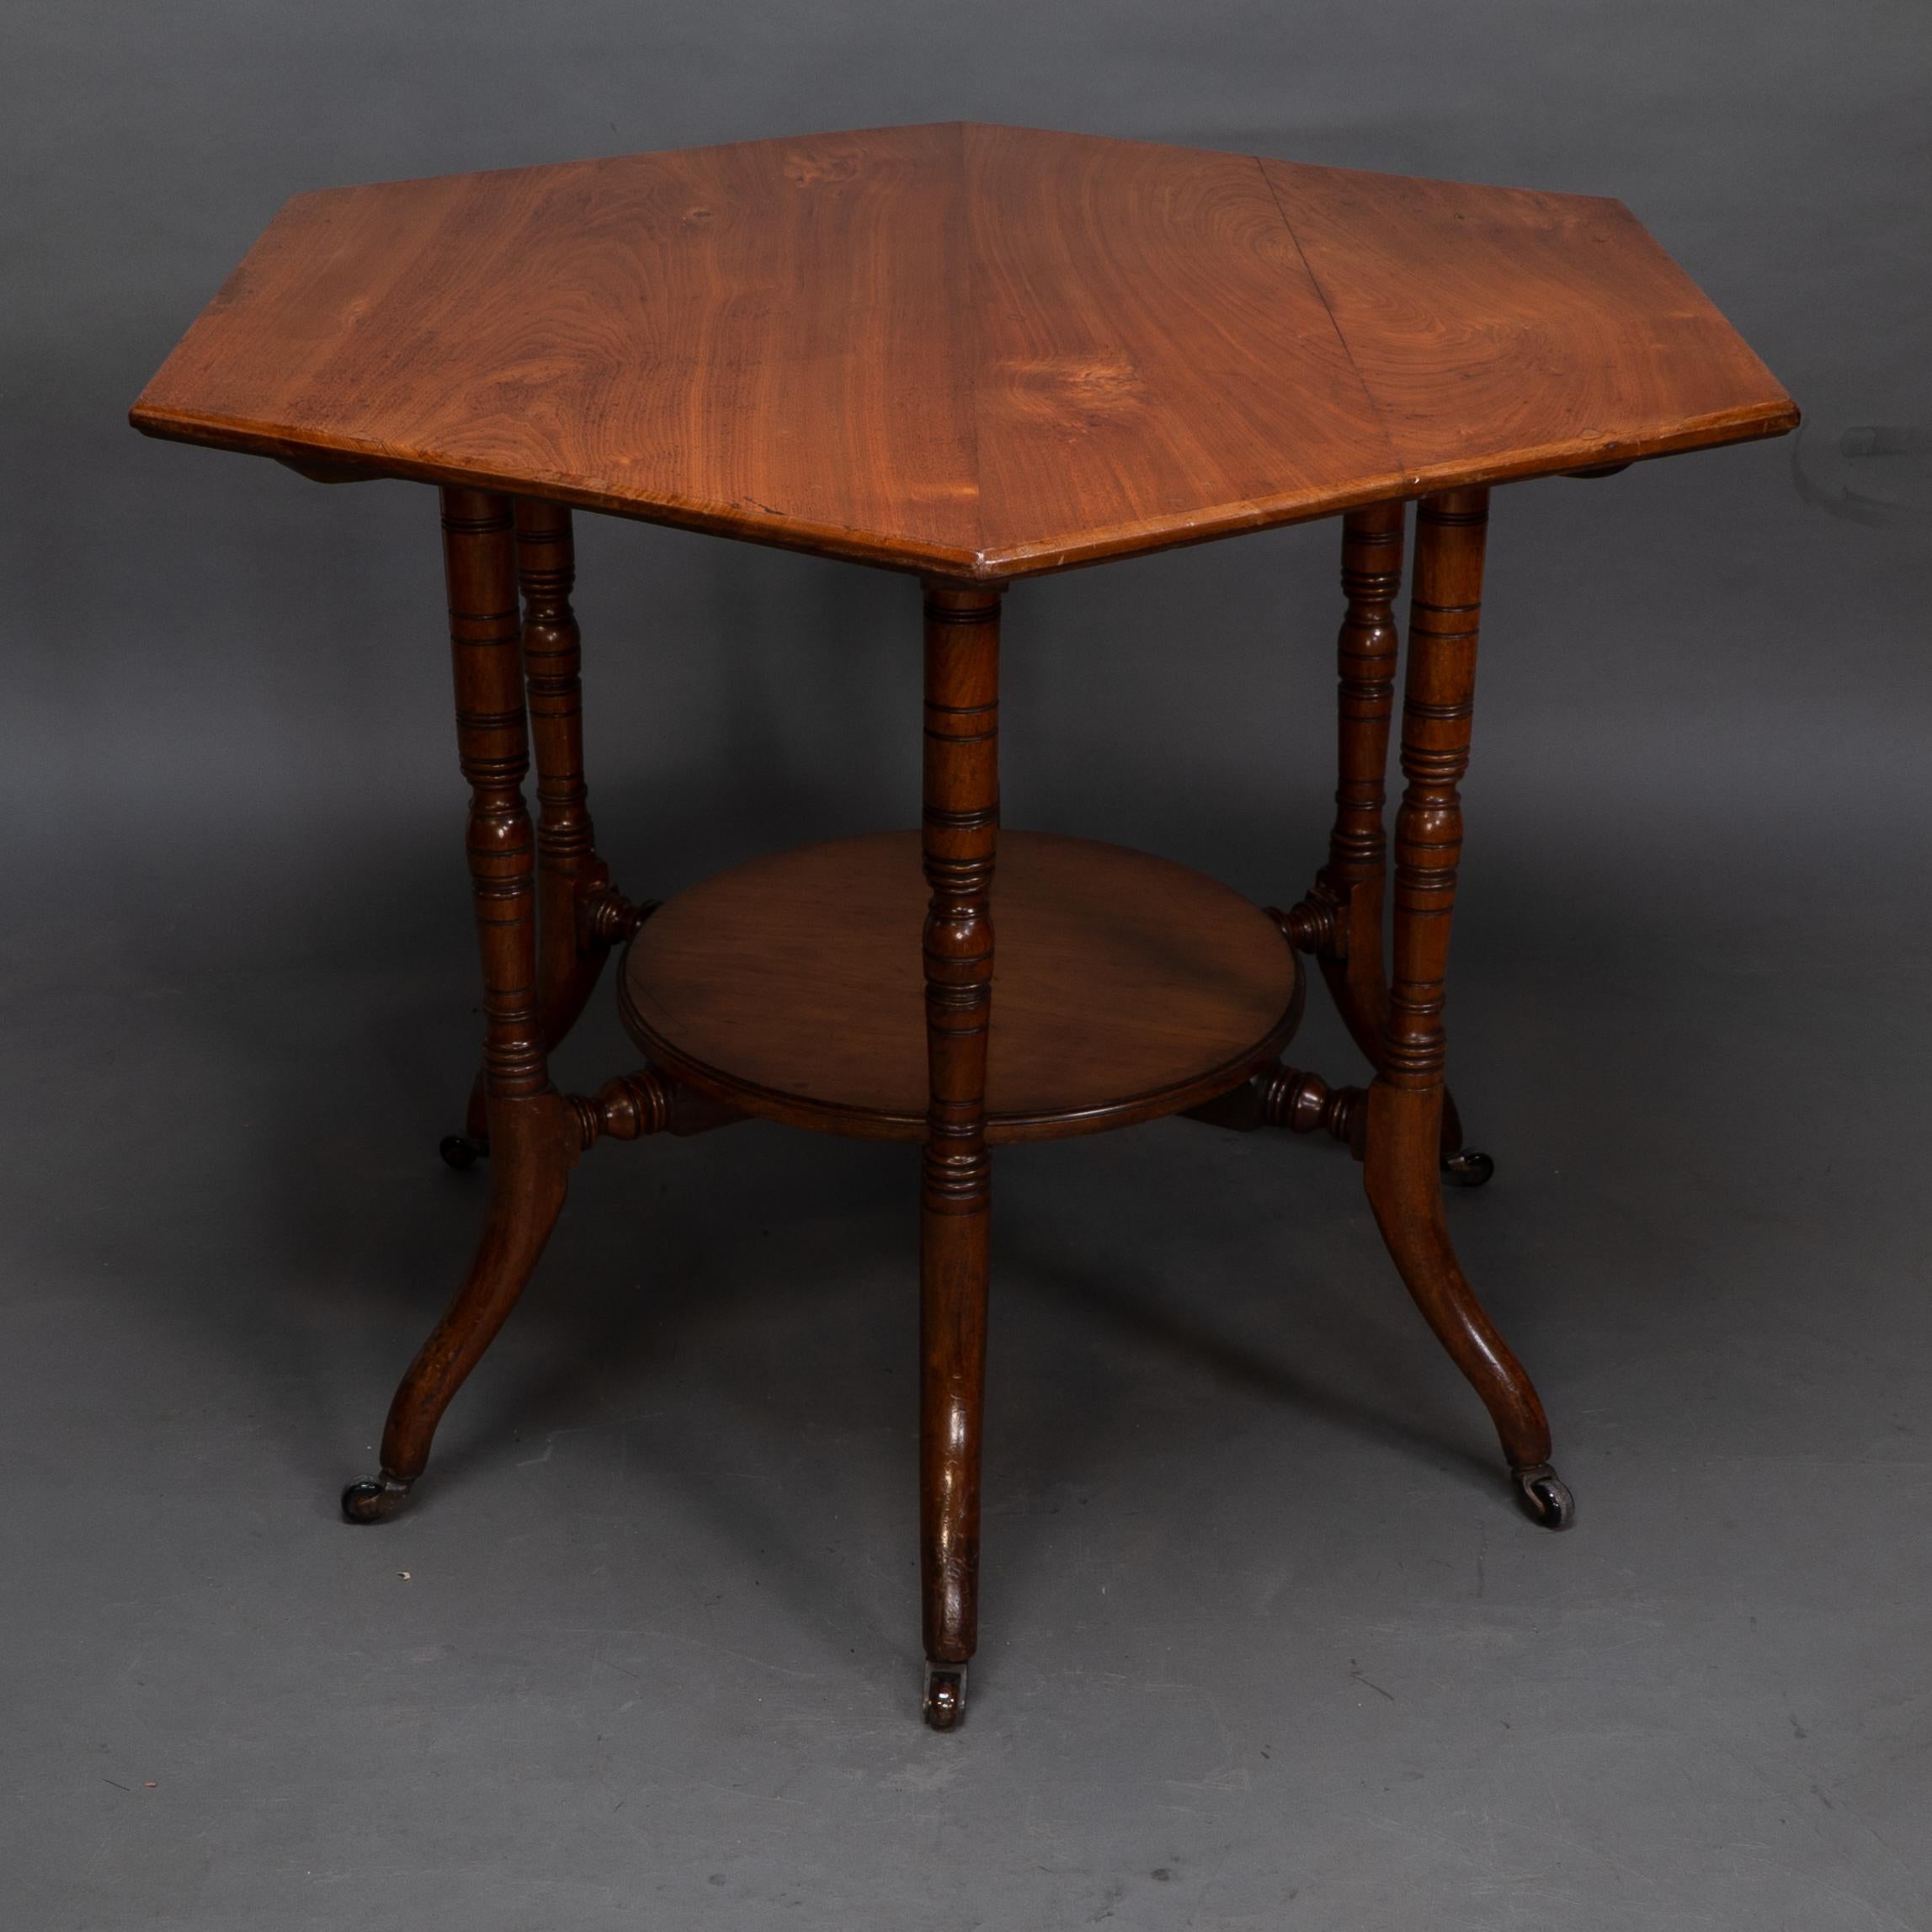 Collinson & Lock attributed. An Aesthetic Movement walnut six leg octagonal two tier center table with fine turned legs and out swept feet. The construction has radiating stretchers underneath the top which are joined to central disc with large